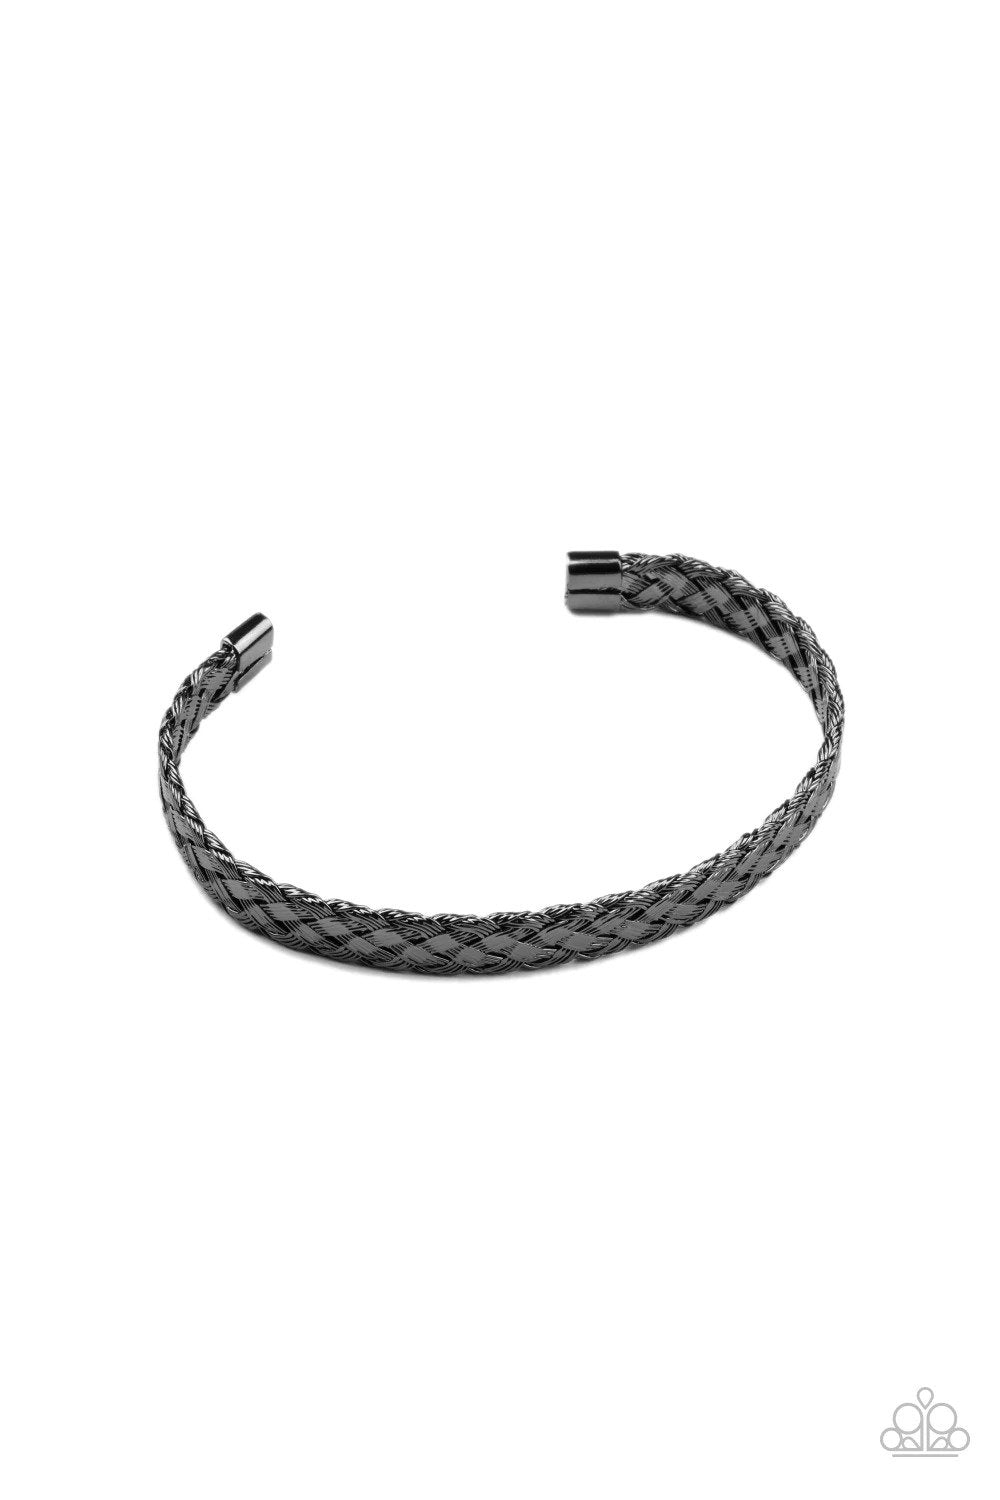 Cable Couture Men's Black Cuff Bracelet - Paparazzi Accessories- lightbox - CarasShop.com - $5 Jewelry by Cara Jewels